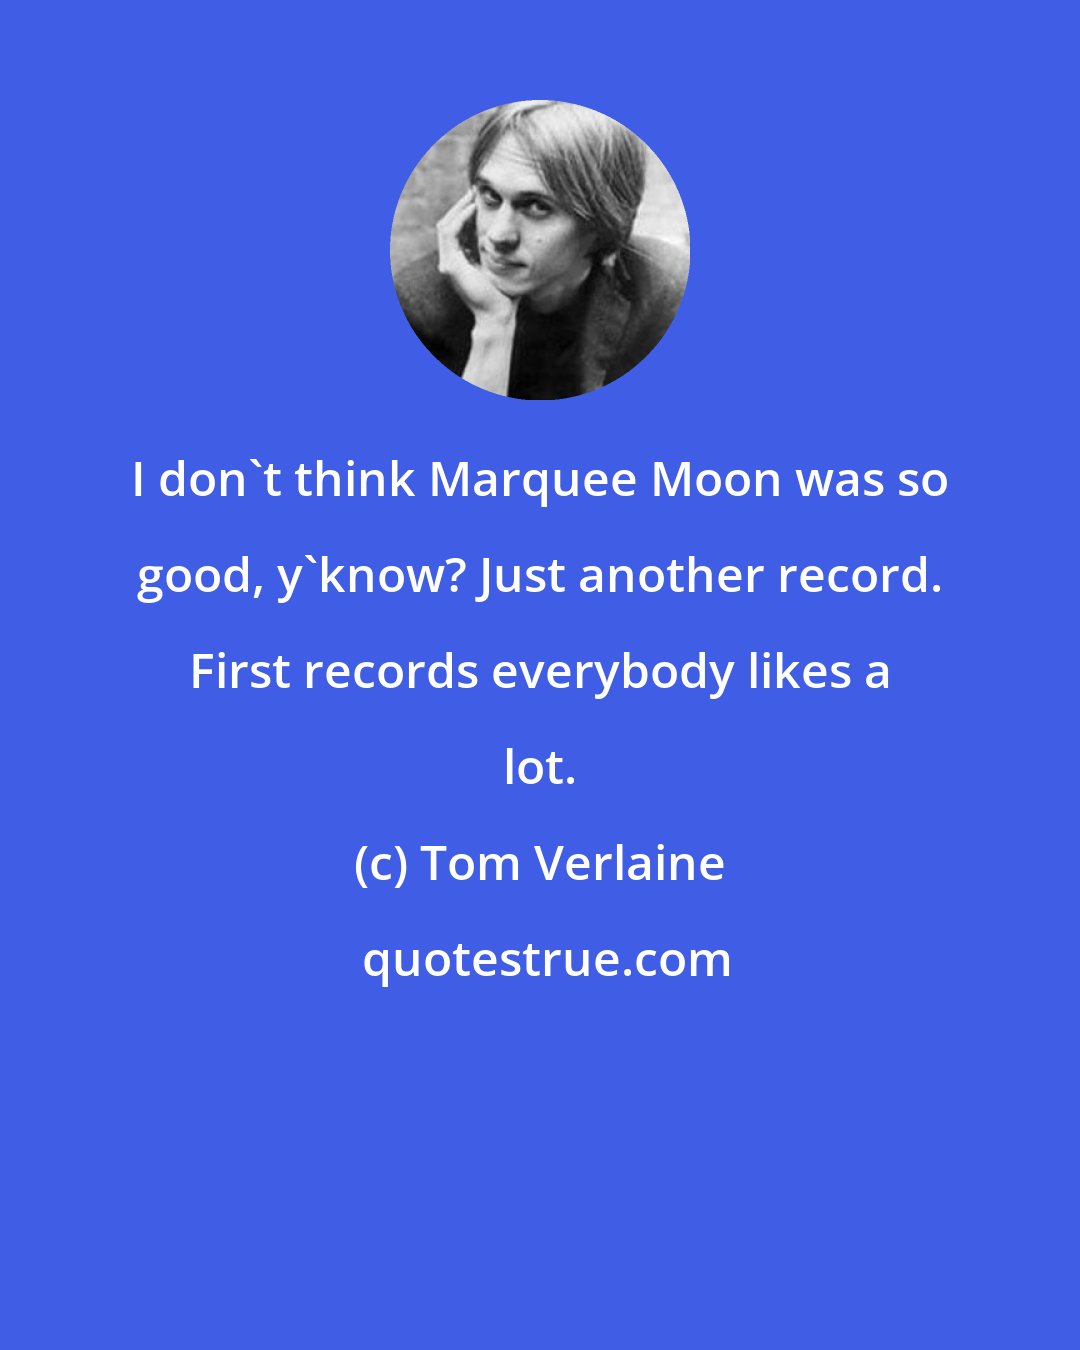 Tom Verlaine: I don't think Marquee Moon was so good, y'know? Just another record. First records everybody likes a lot.